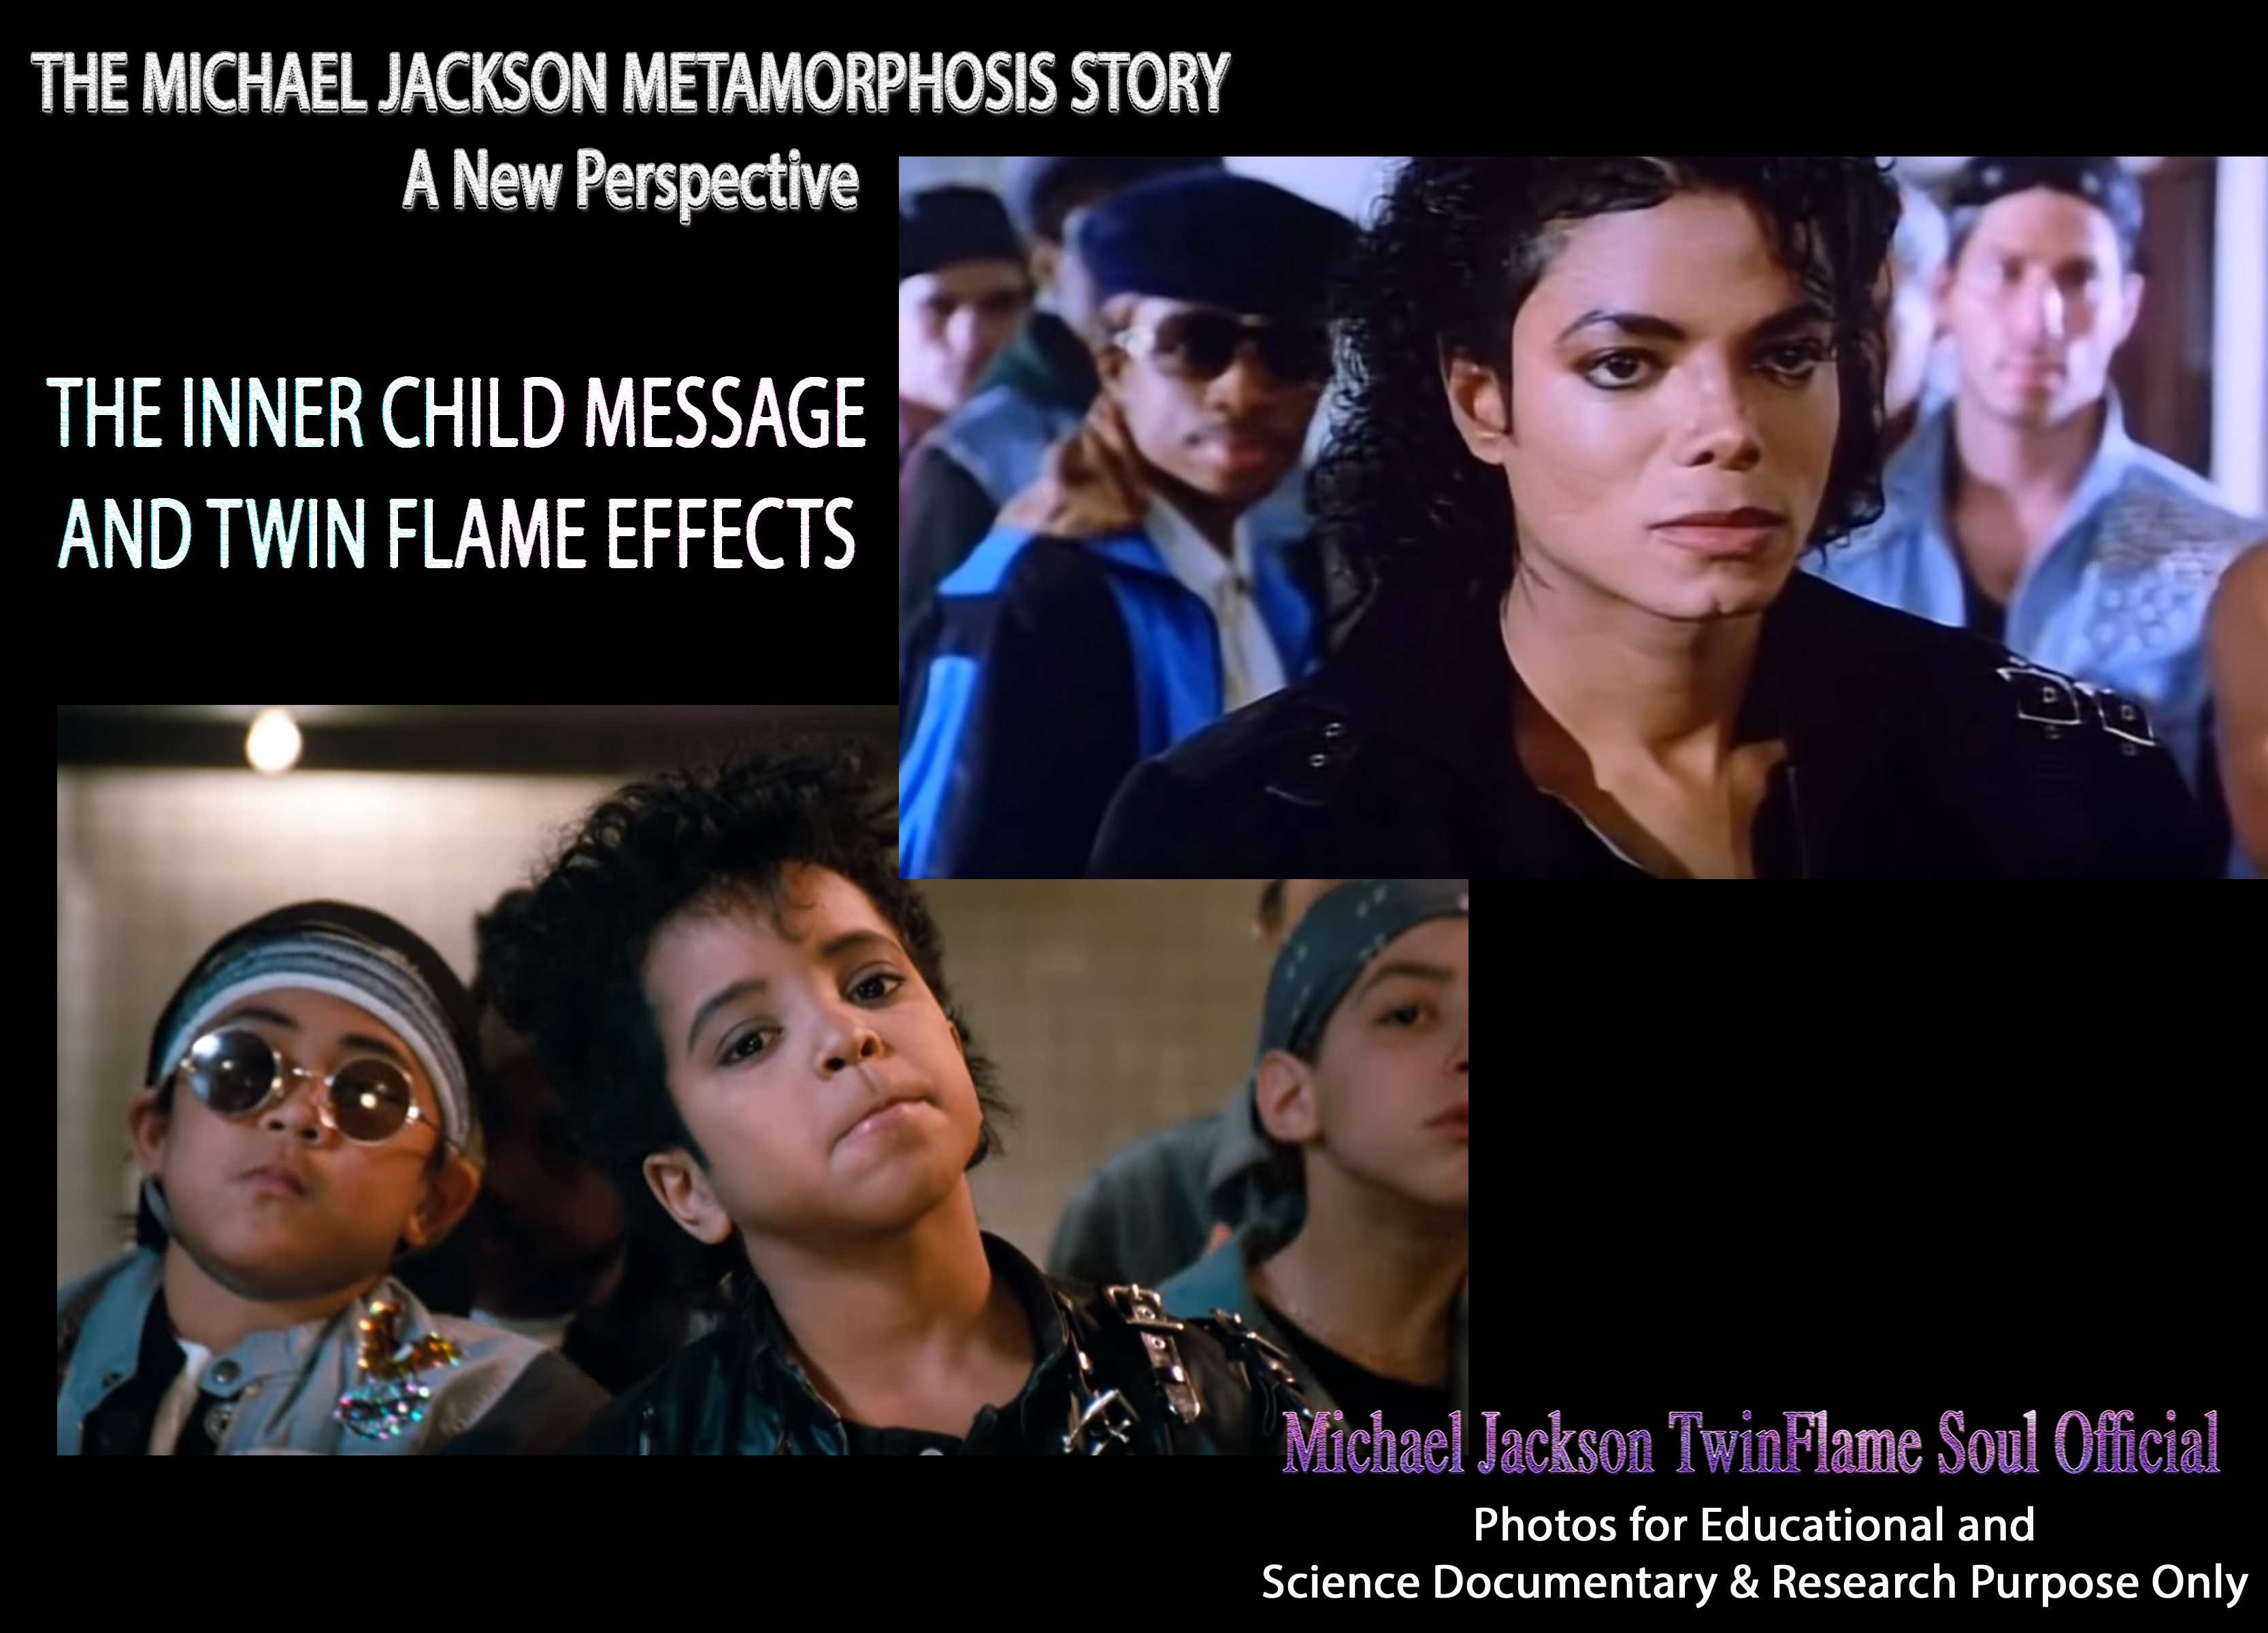 the-michael-jackson-metamorphosis-story-inner-child-message-and-twin-flame-effects-c2a9-michael-jackson-twinflame-soul-official.jpg